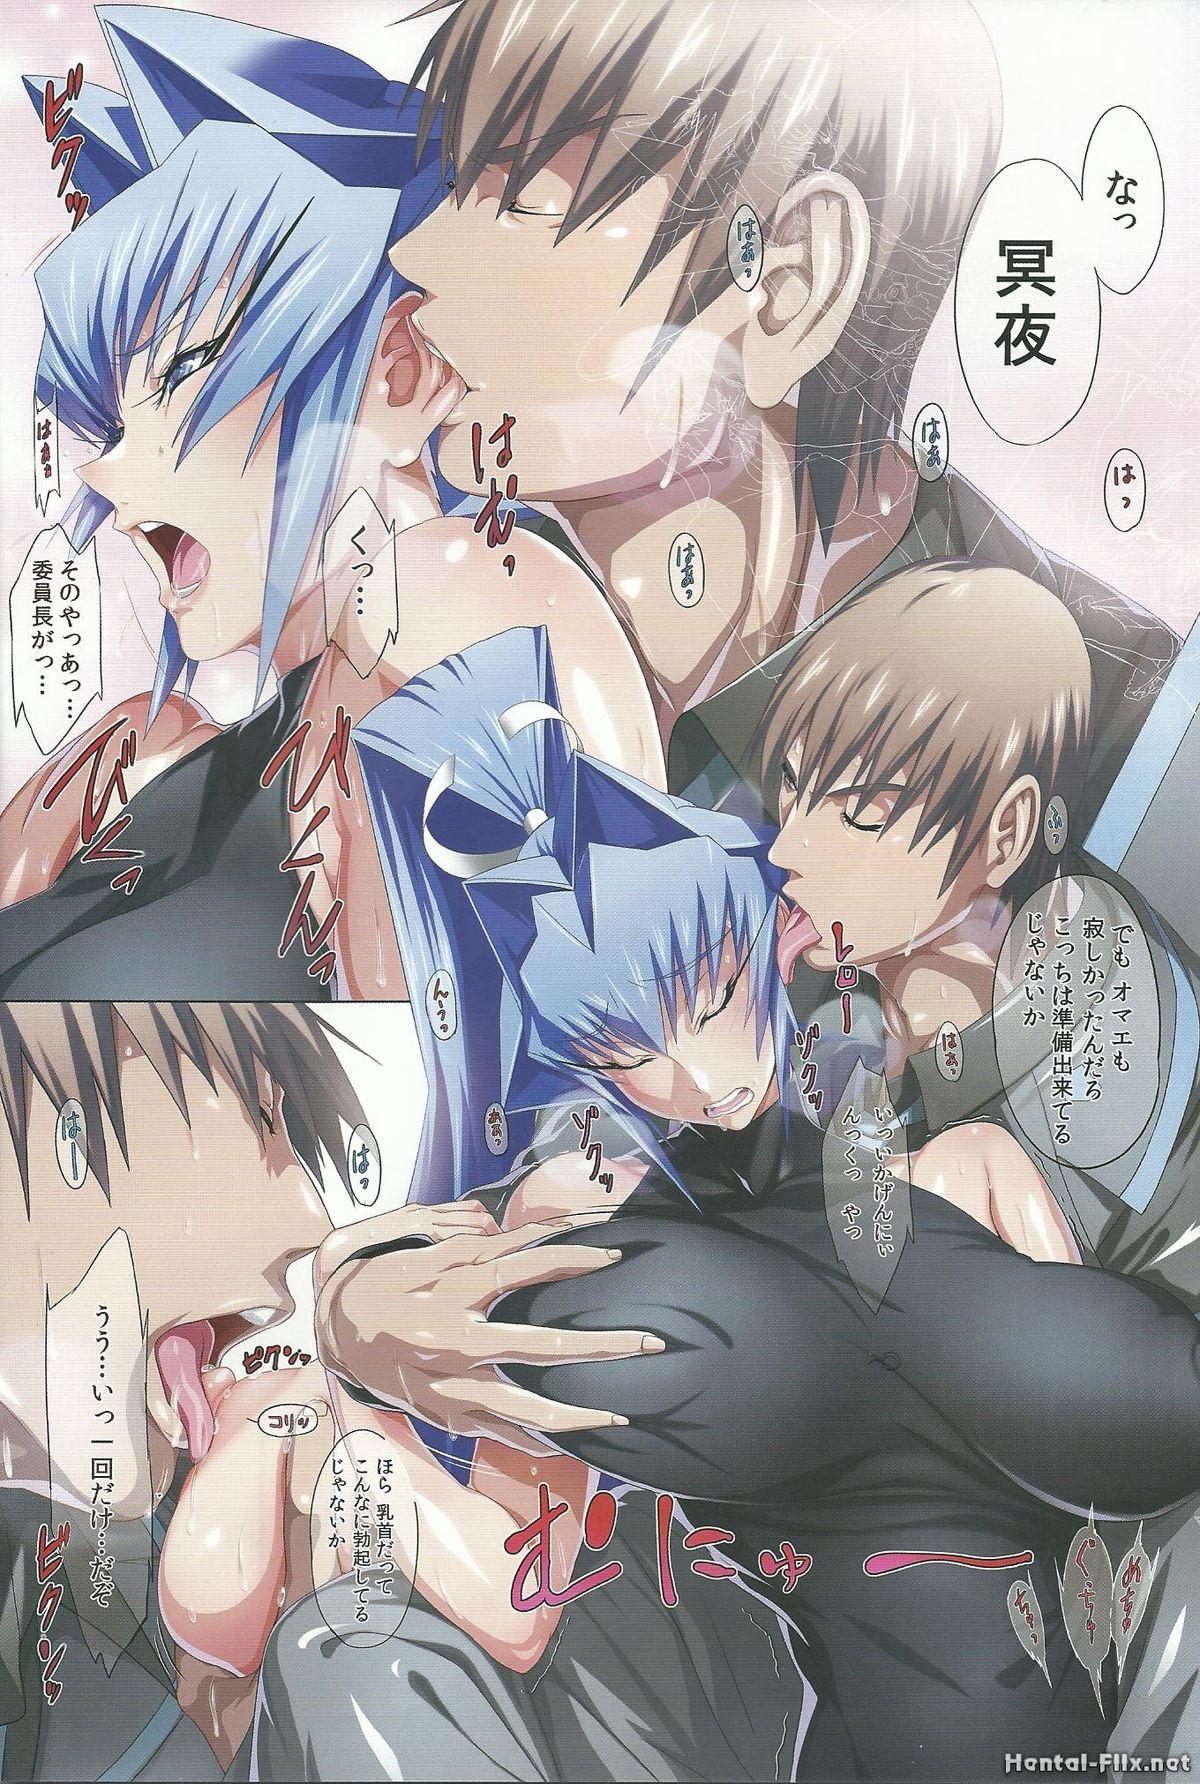 Handsome Egaku no Wate - Muv-luv Muv-luv alternative total eclipse Amature Sex Tapes - Page 5